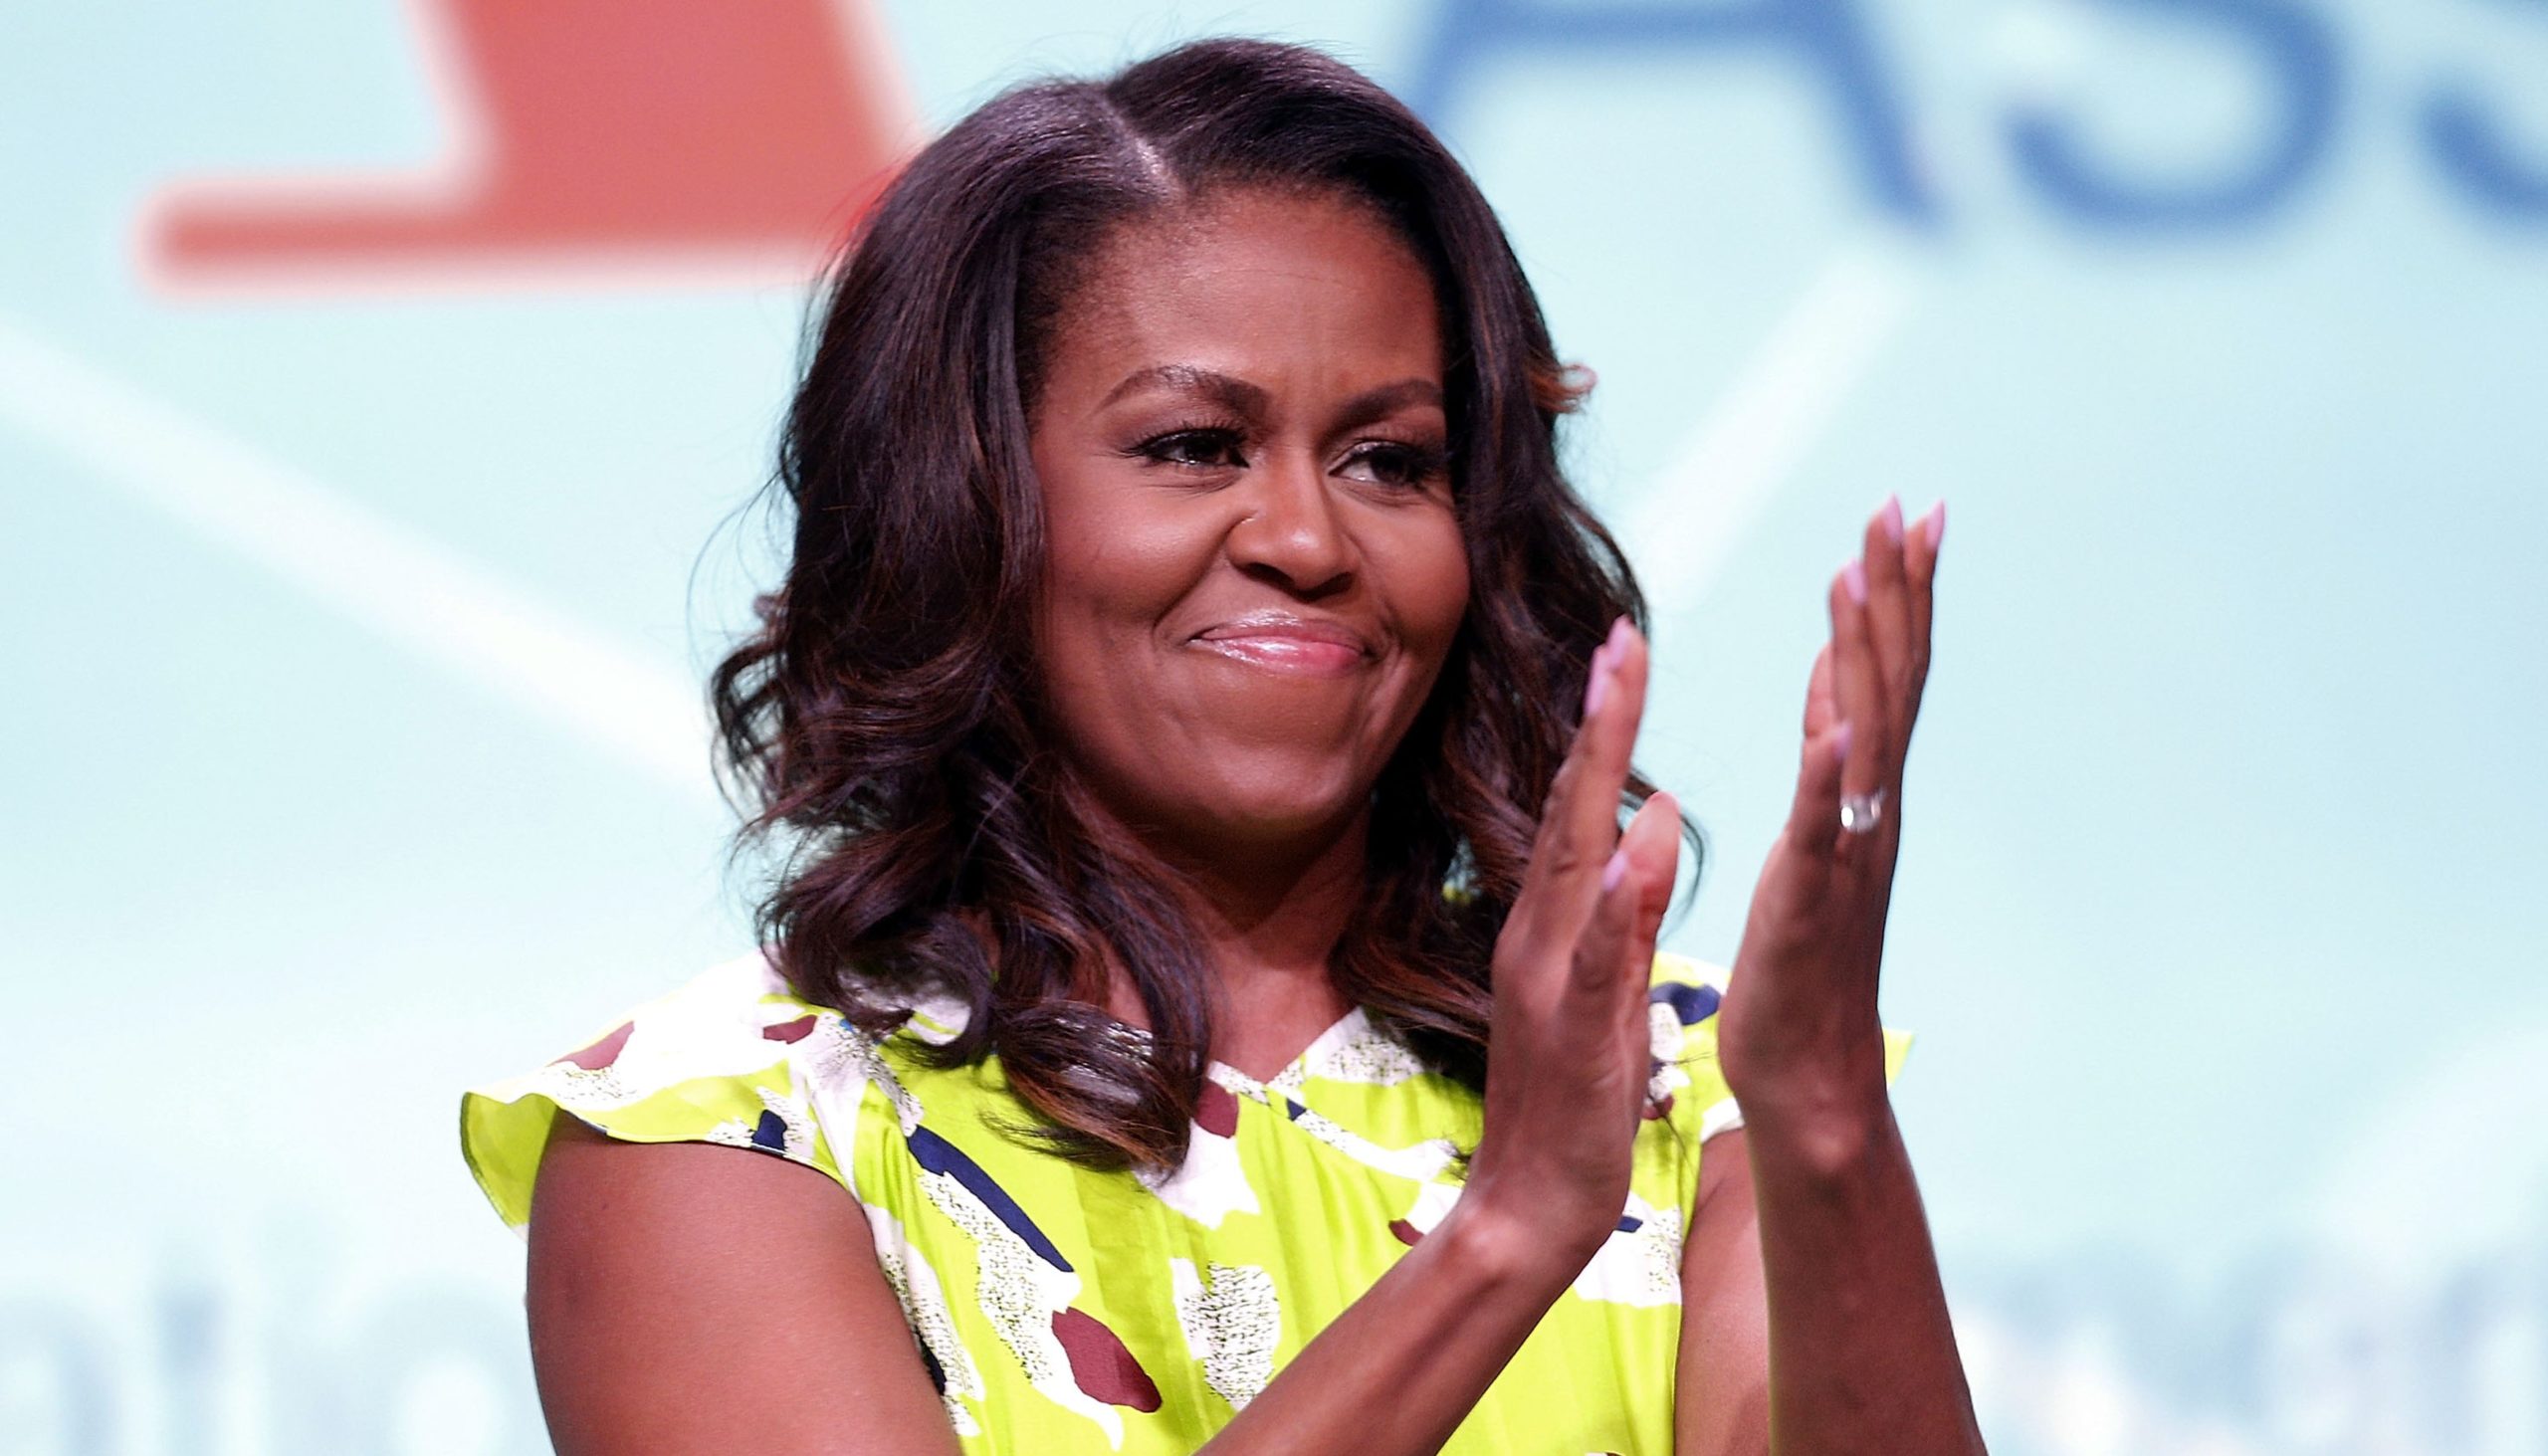 Michelle Obama Showed Off Her Natural Curls for Her Birthday